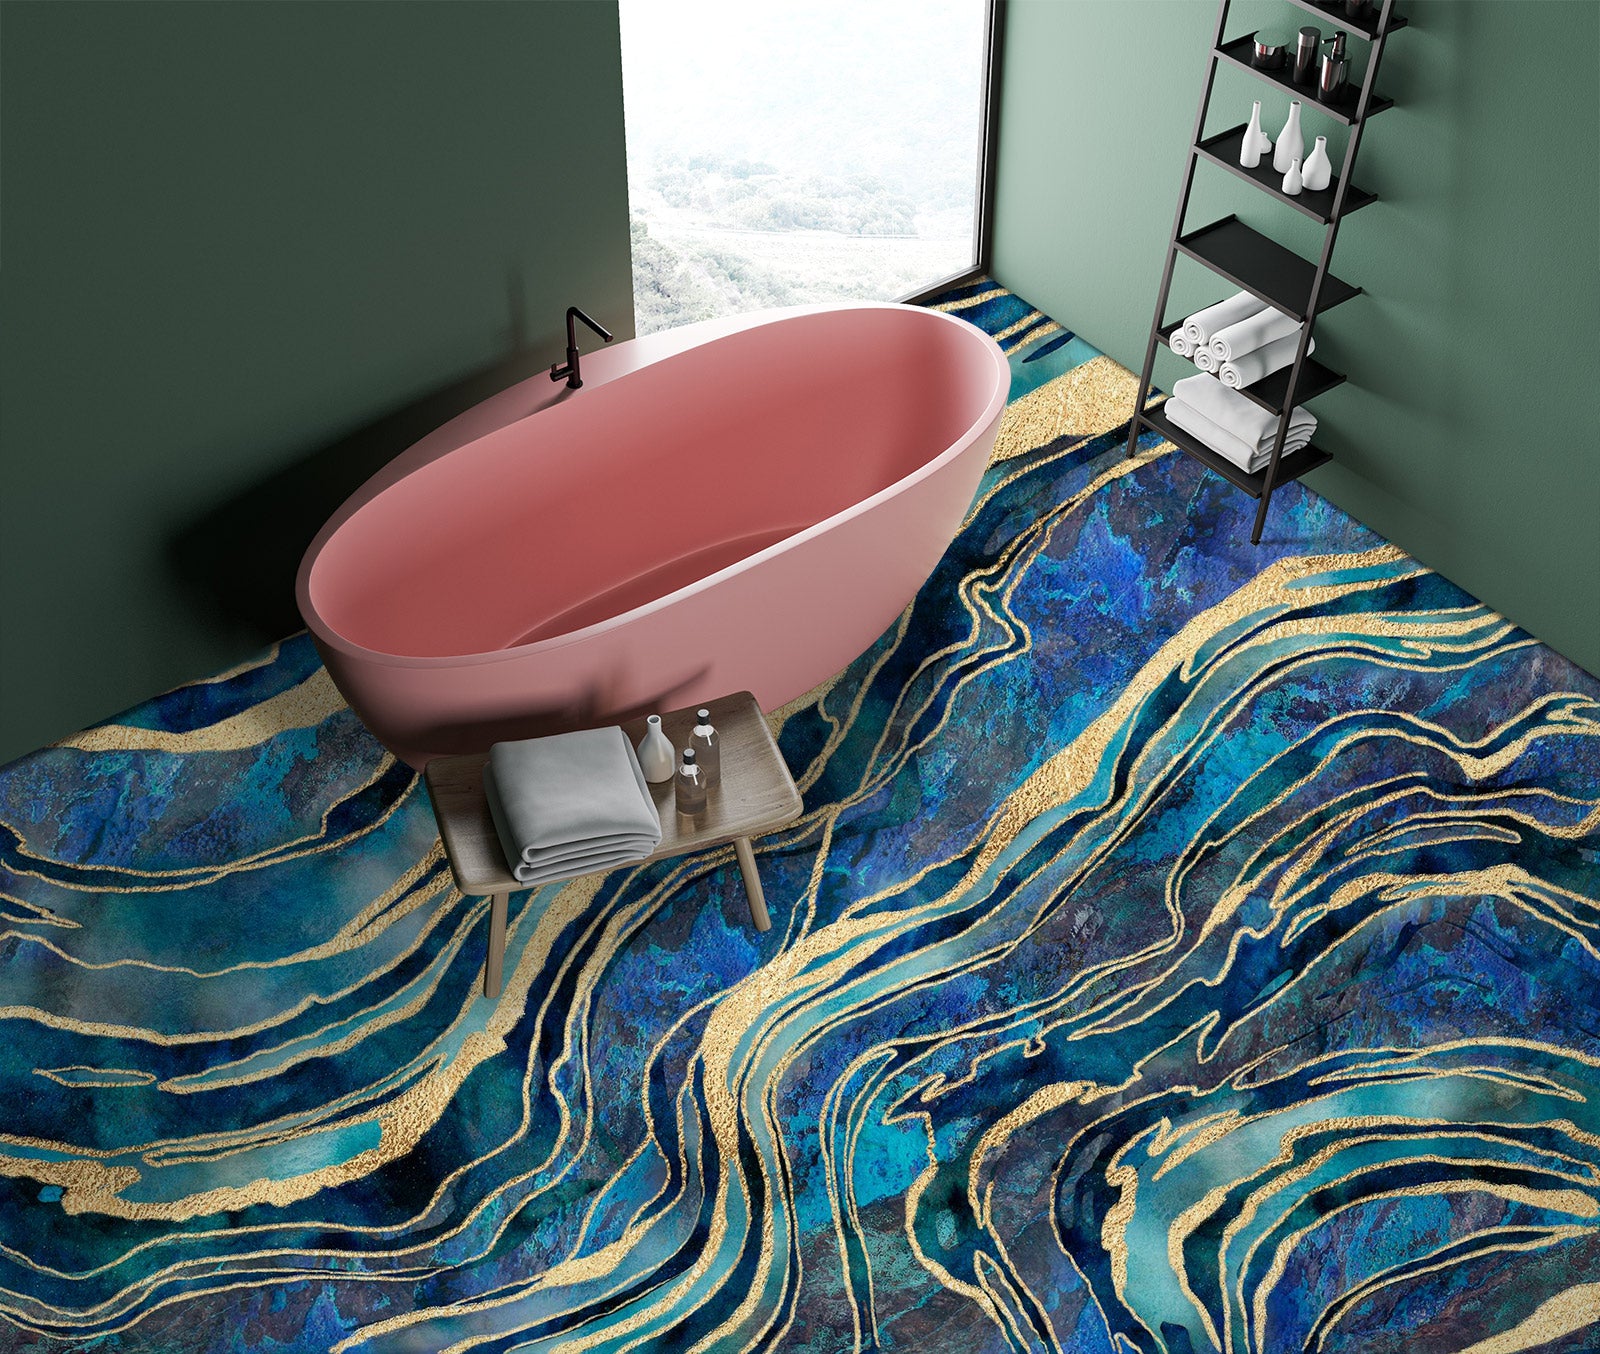 3D Teal Gold Stripes 102124 Andrea Haase Floor Mural  Wallpaper Murals Self-Adhesive Removable Print Epoxy